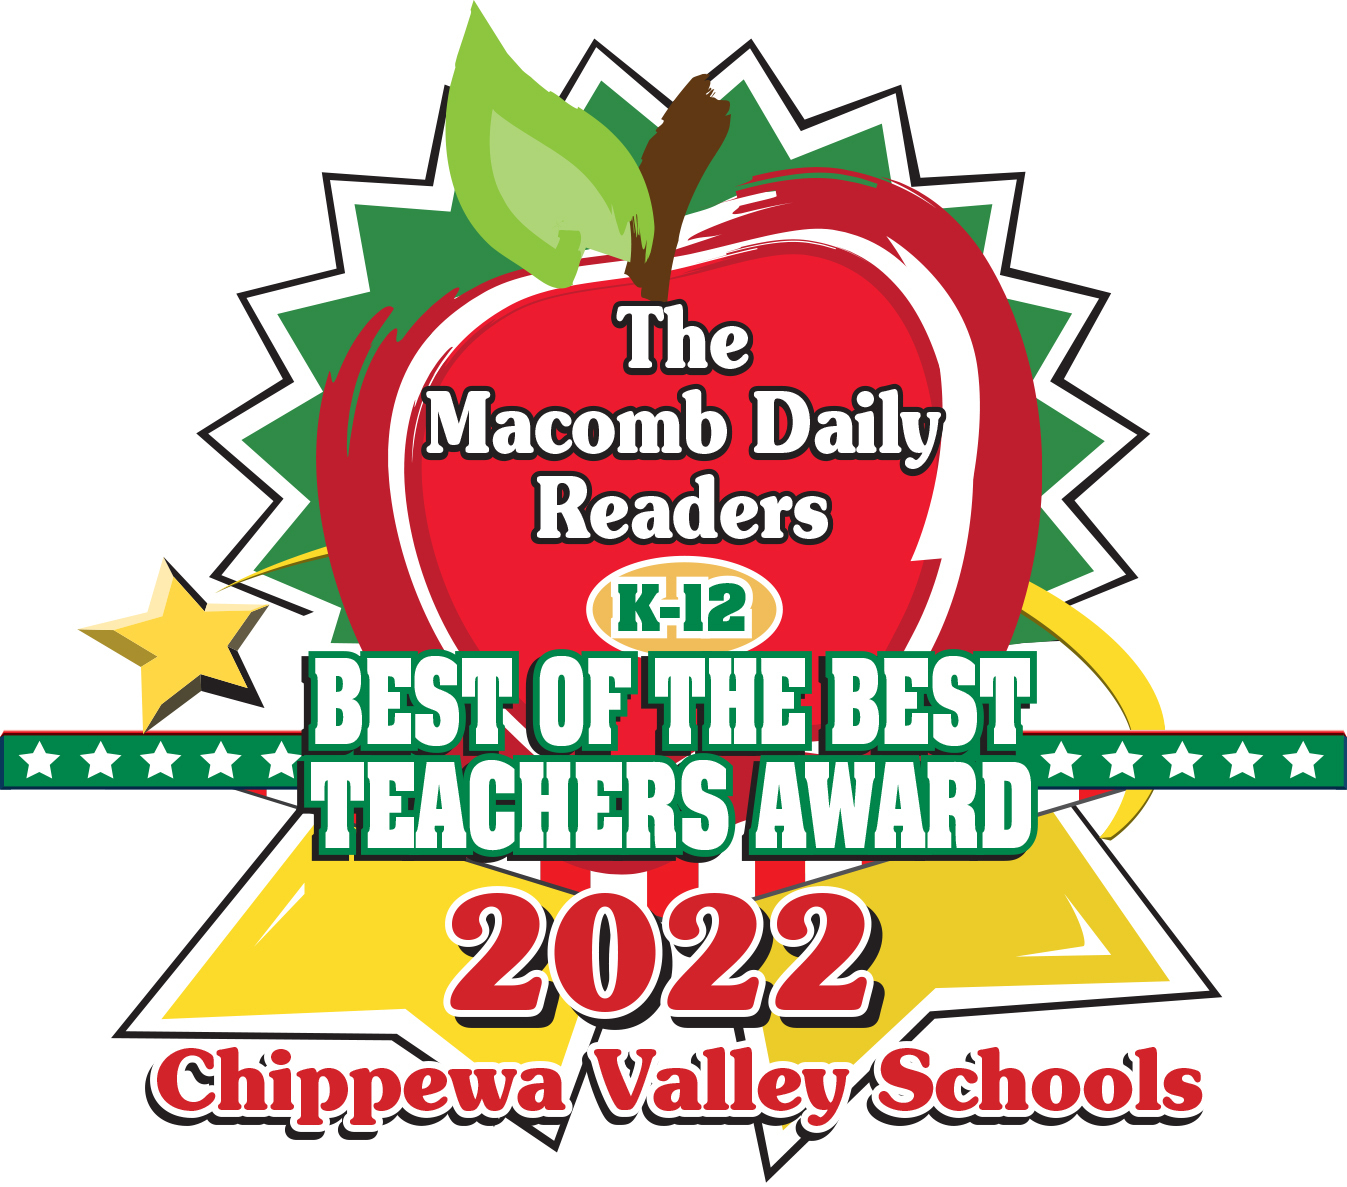 The Macomb Daily Readers K-12 BEST OF THE BEST TEACHERS AWARD 2022 Chippewa Valley Schools